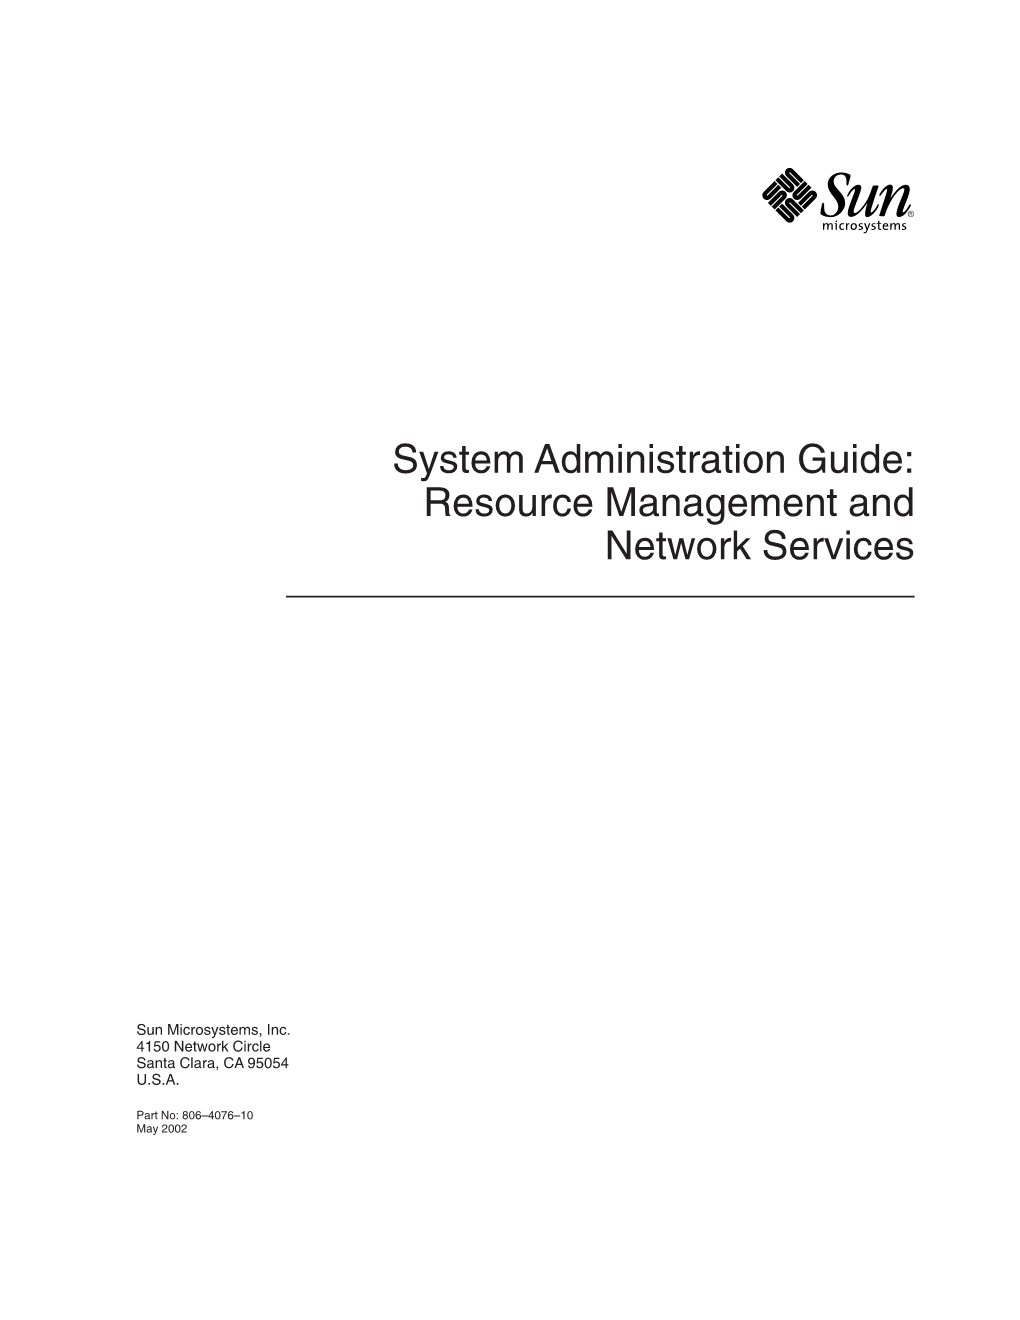 System Administration Guide: Resource Management and Network Services